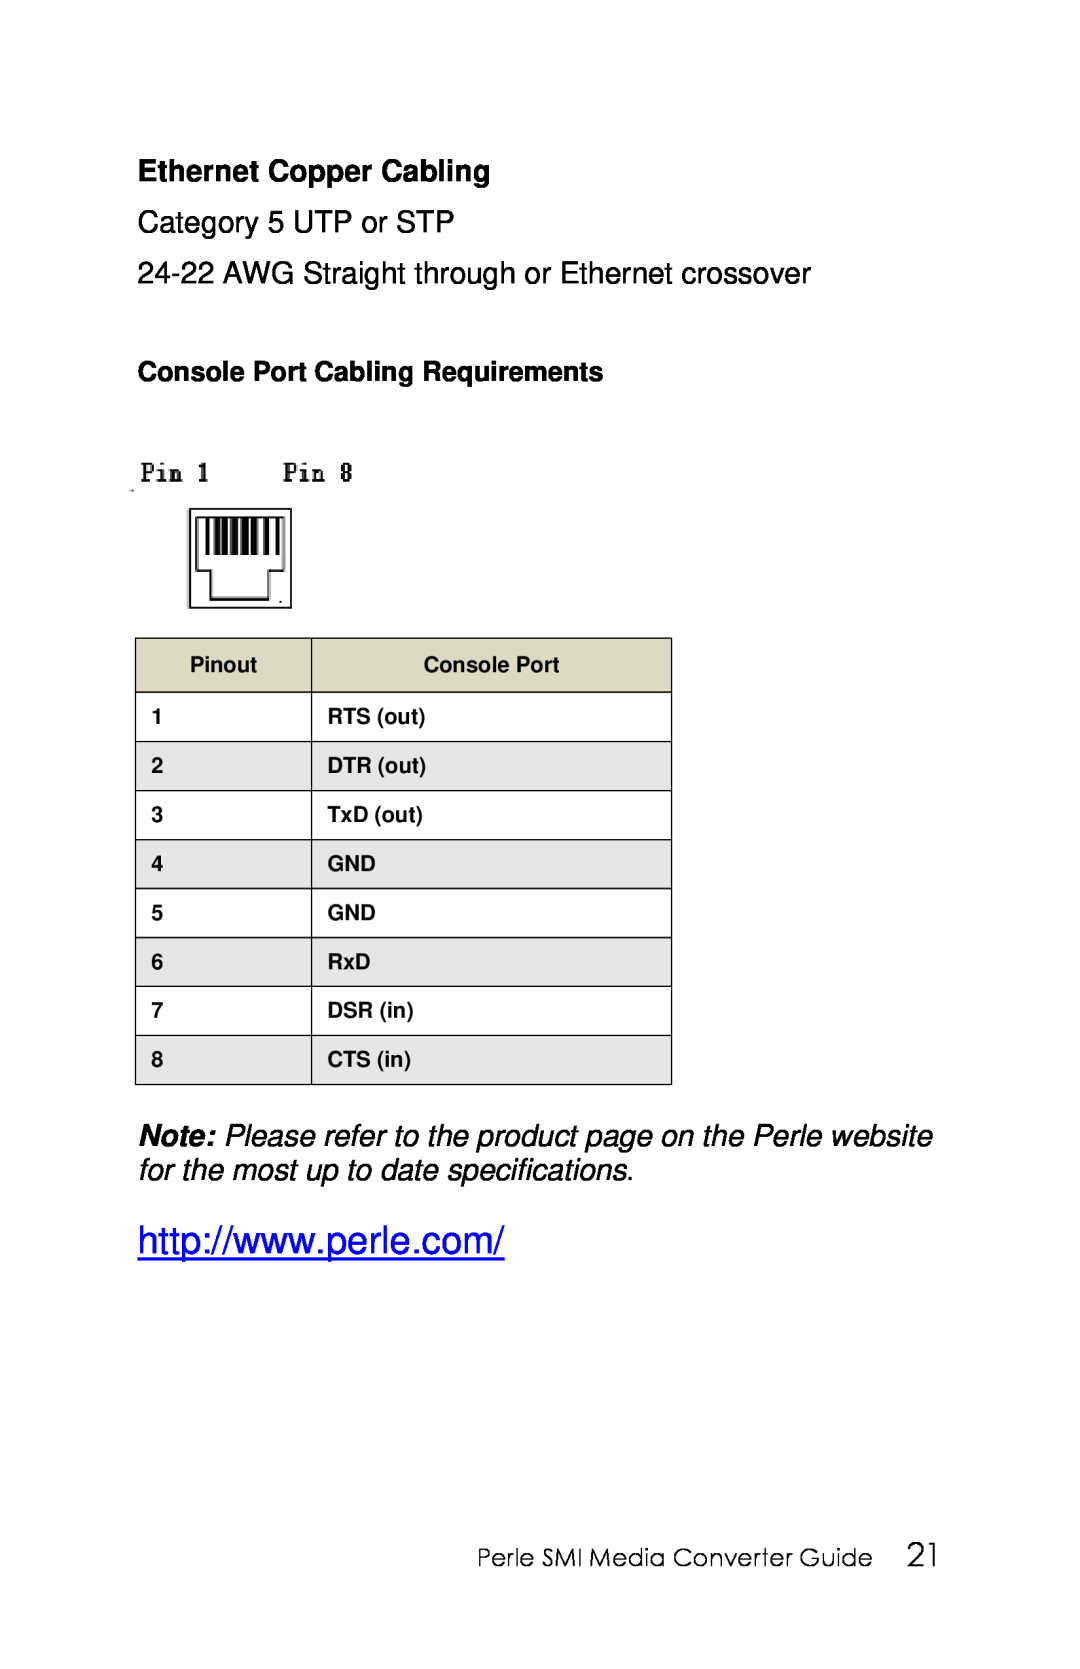 Perle Systems 5500316-13 Ethernet Copper Cabling, Console Port Cabling Requirements, Pinout, RTS out, DTR out, TxD out 